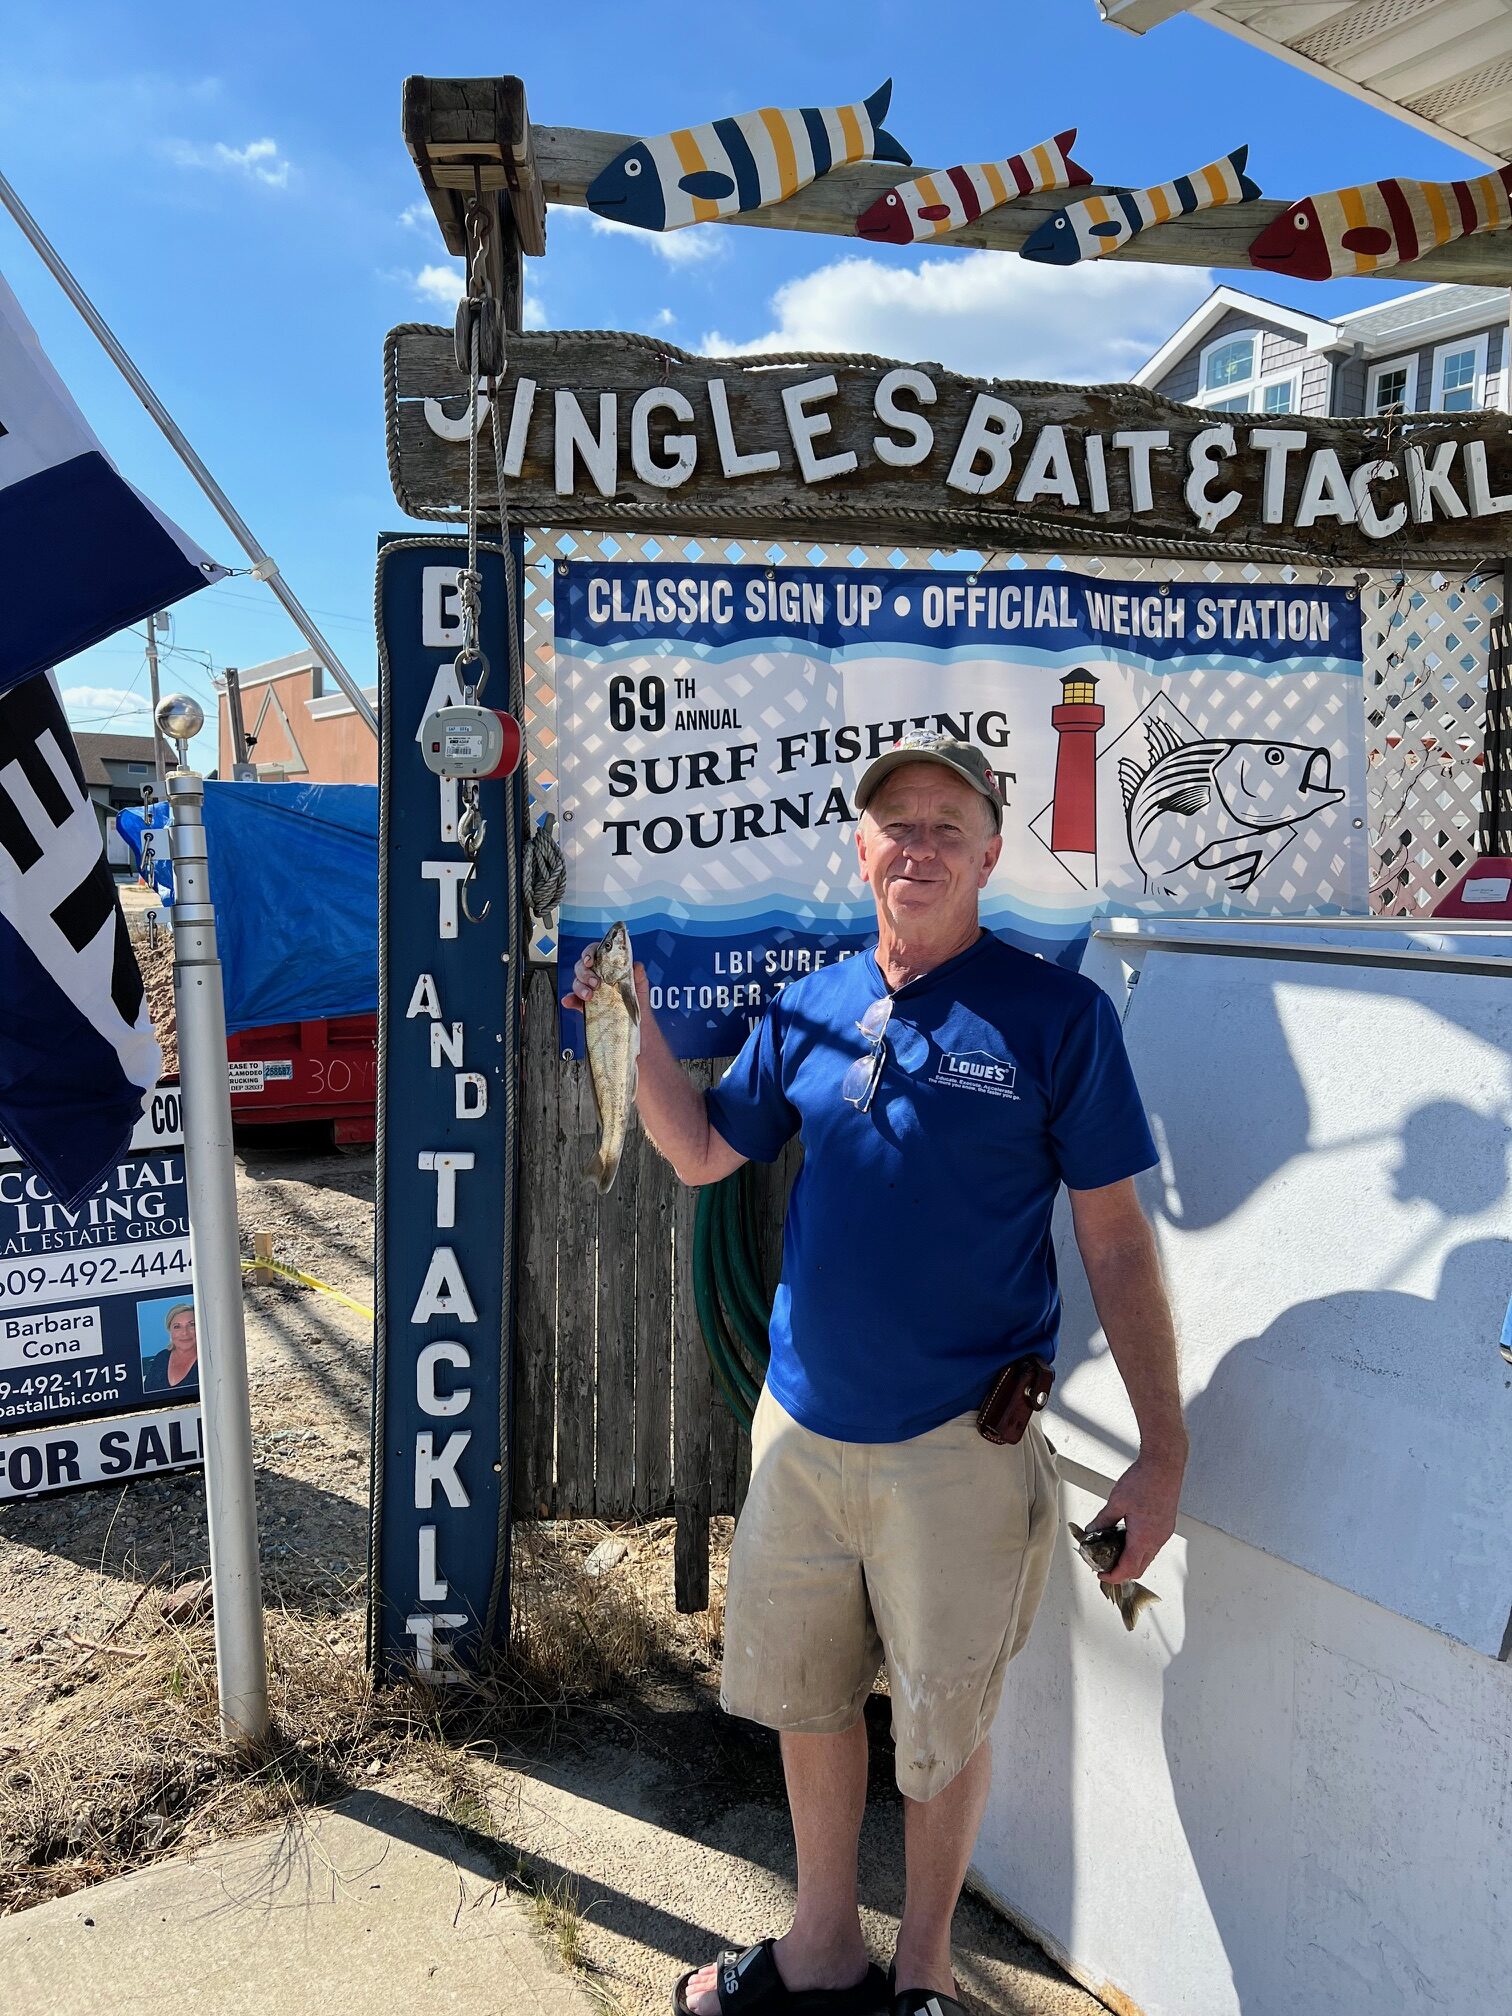 Daily Report - Jingles Bait and Tackle - Beach Haven (LBI), NJ